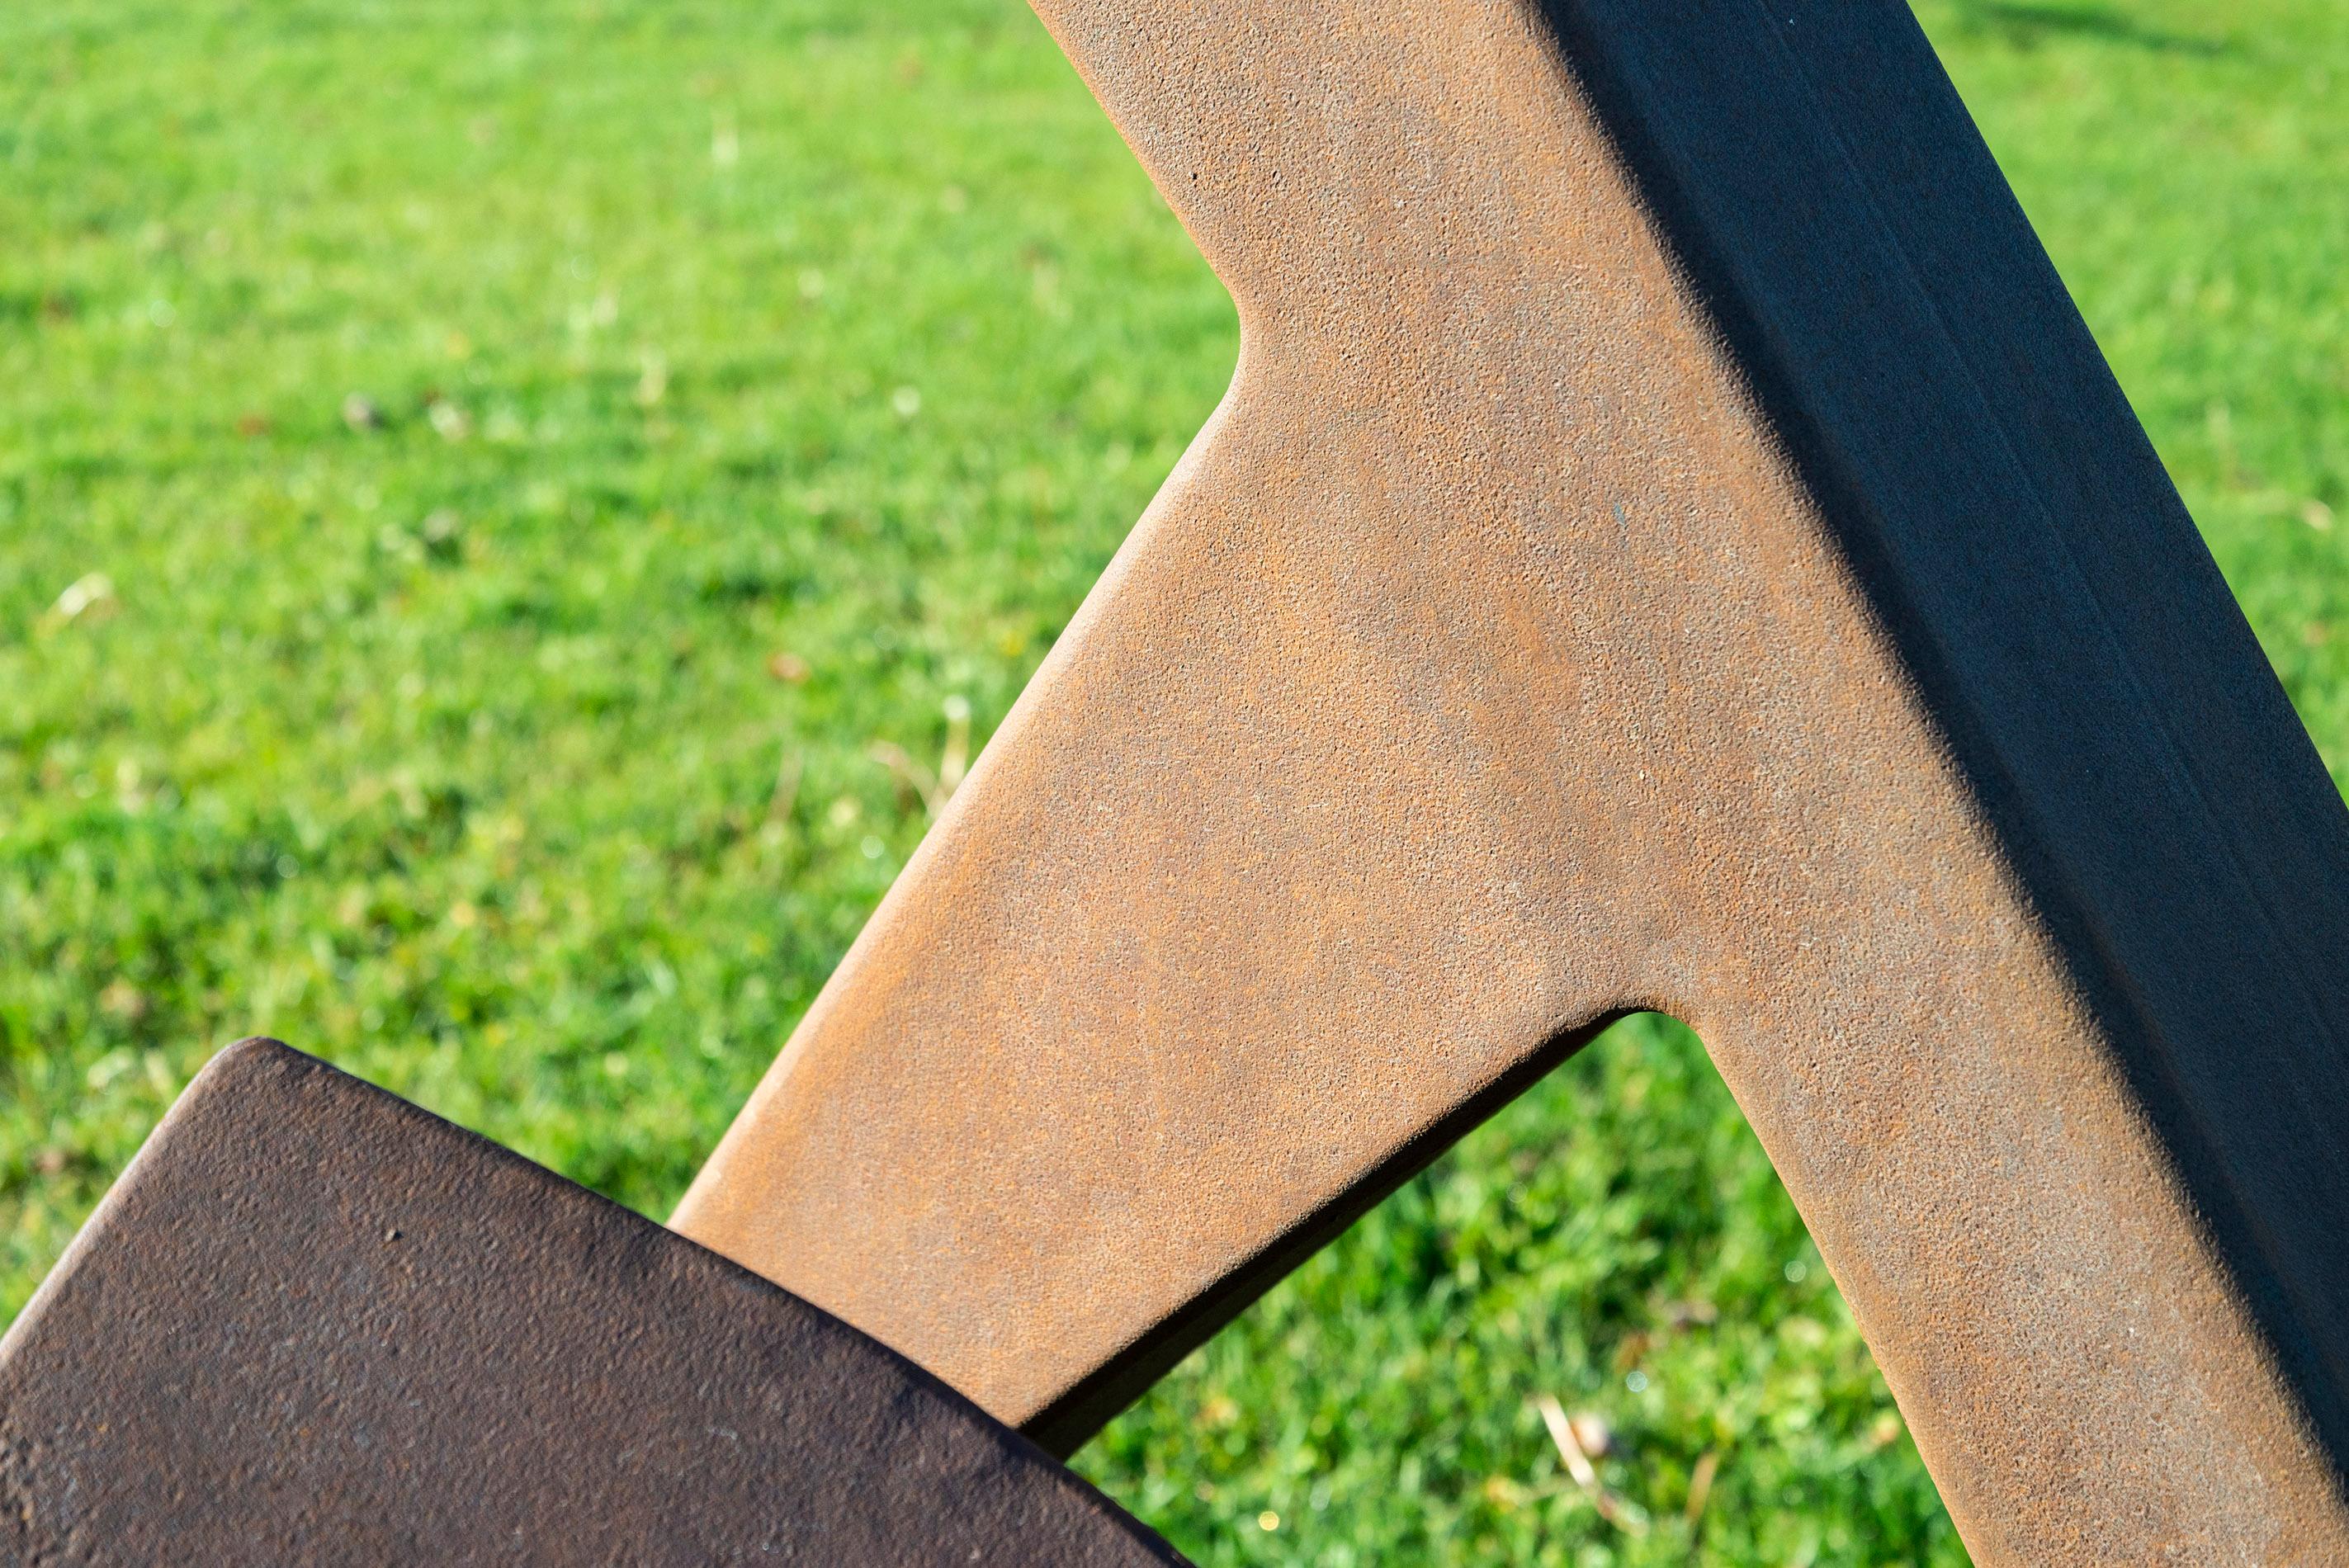 This imposing outdoor sculpture was created by Quebec artist Claude Millette. Six quadrangular beams of corten steel twist and fold resting on the ground. ‘Trajectoire’ means ‘trajectory’ in French and this sculpture does possess a sense of upward